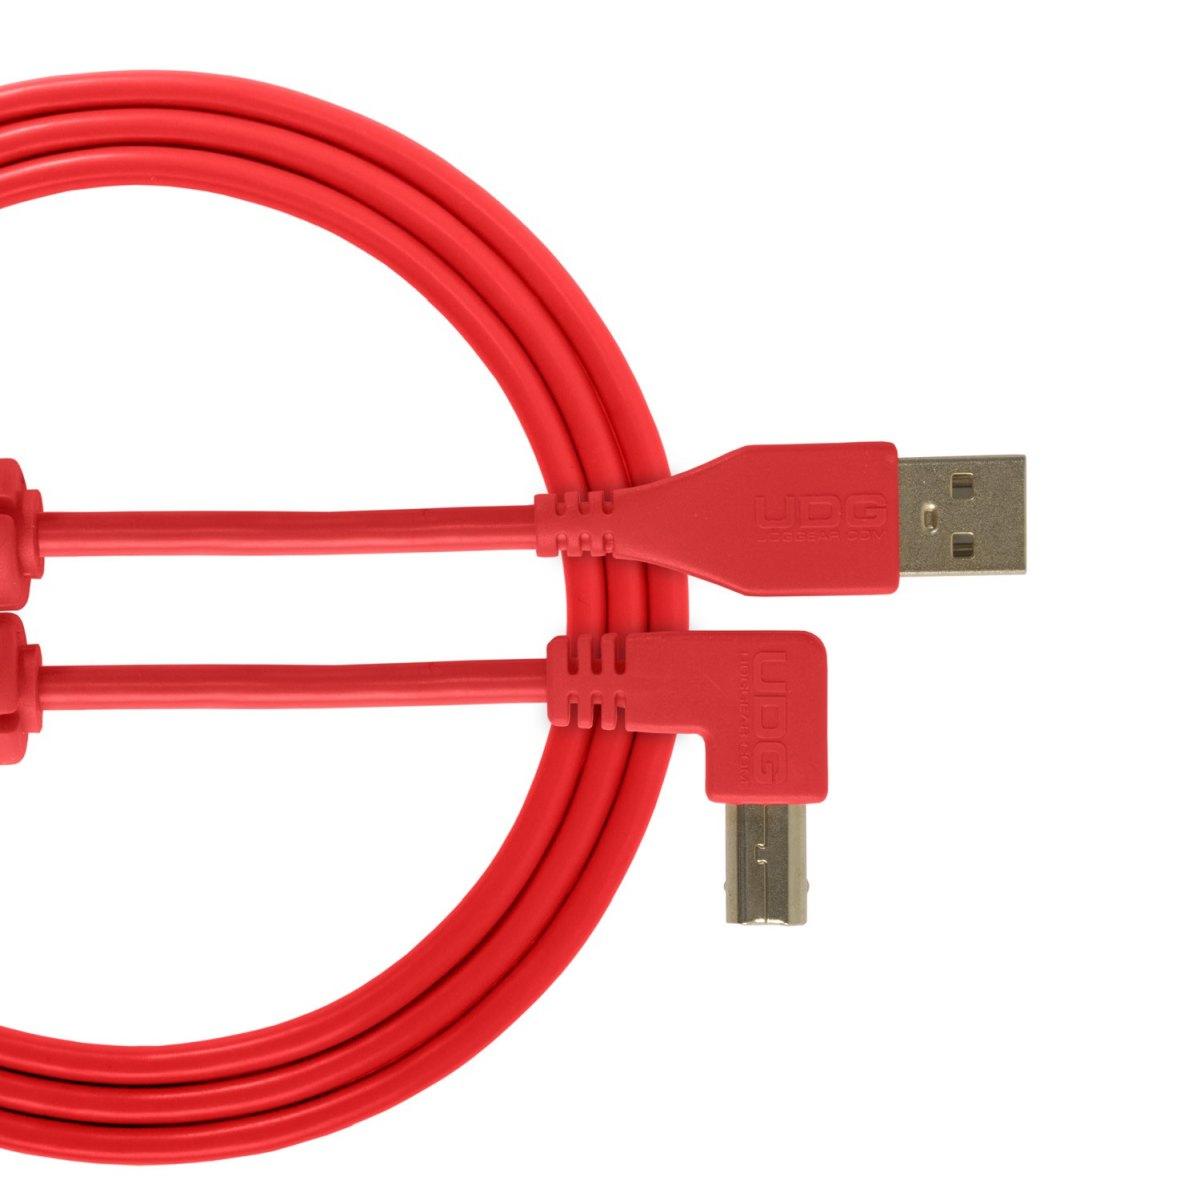 Udg u95004rd - ultimate cavo usb 2.0 a-b red angled 1m